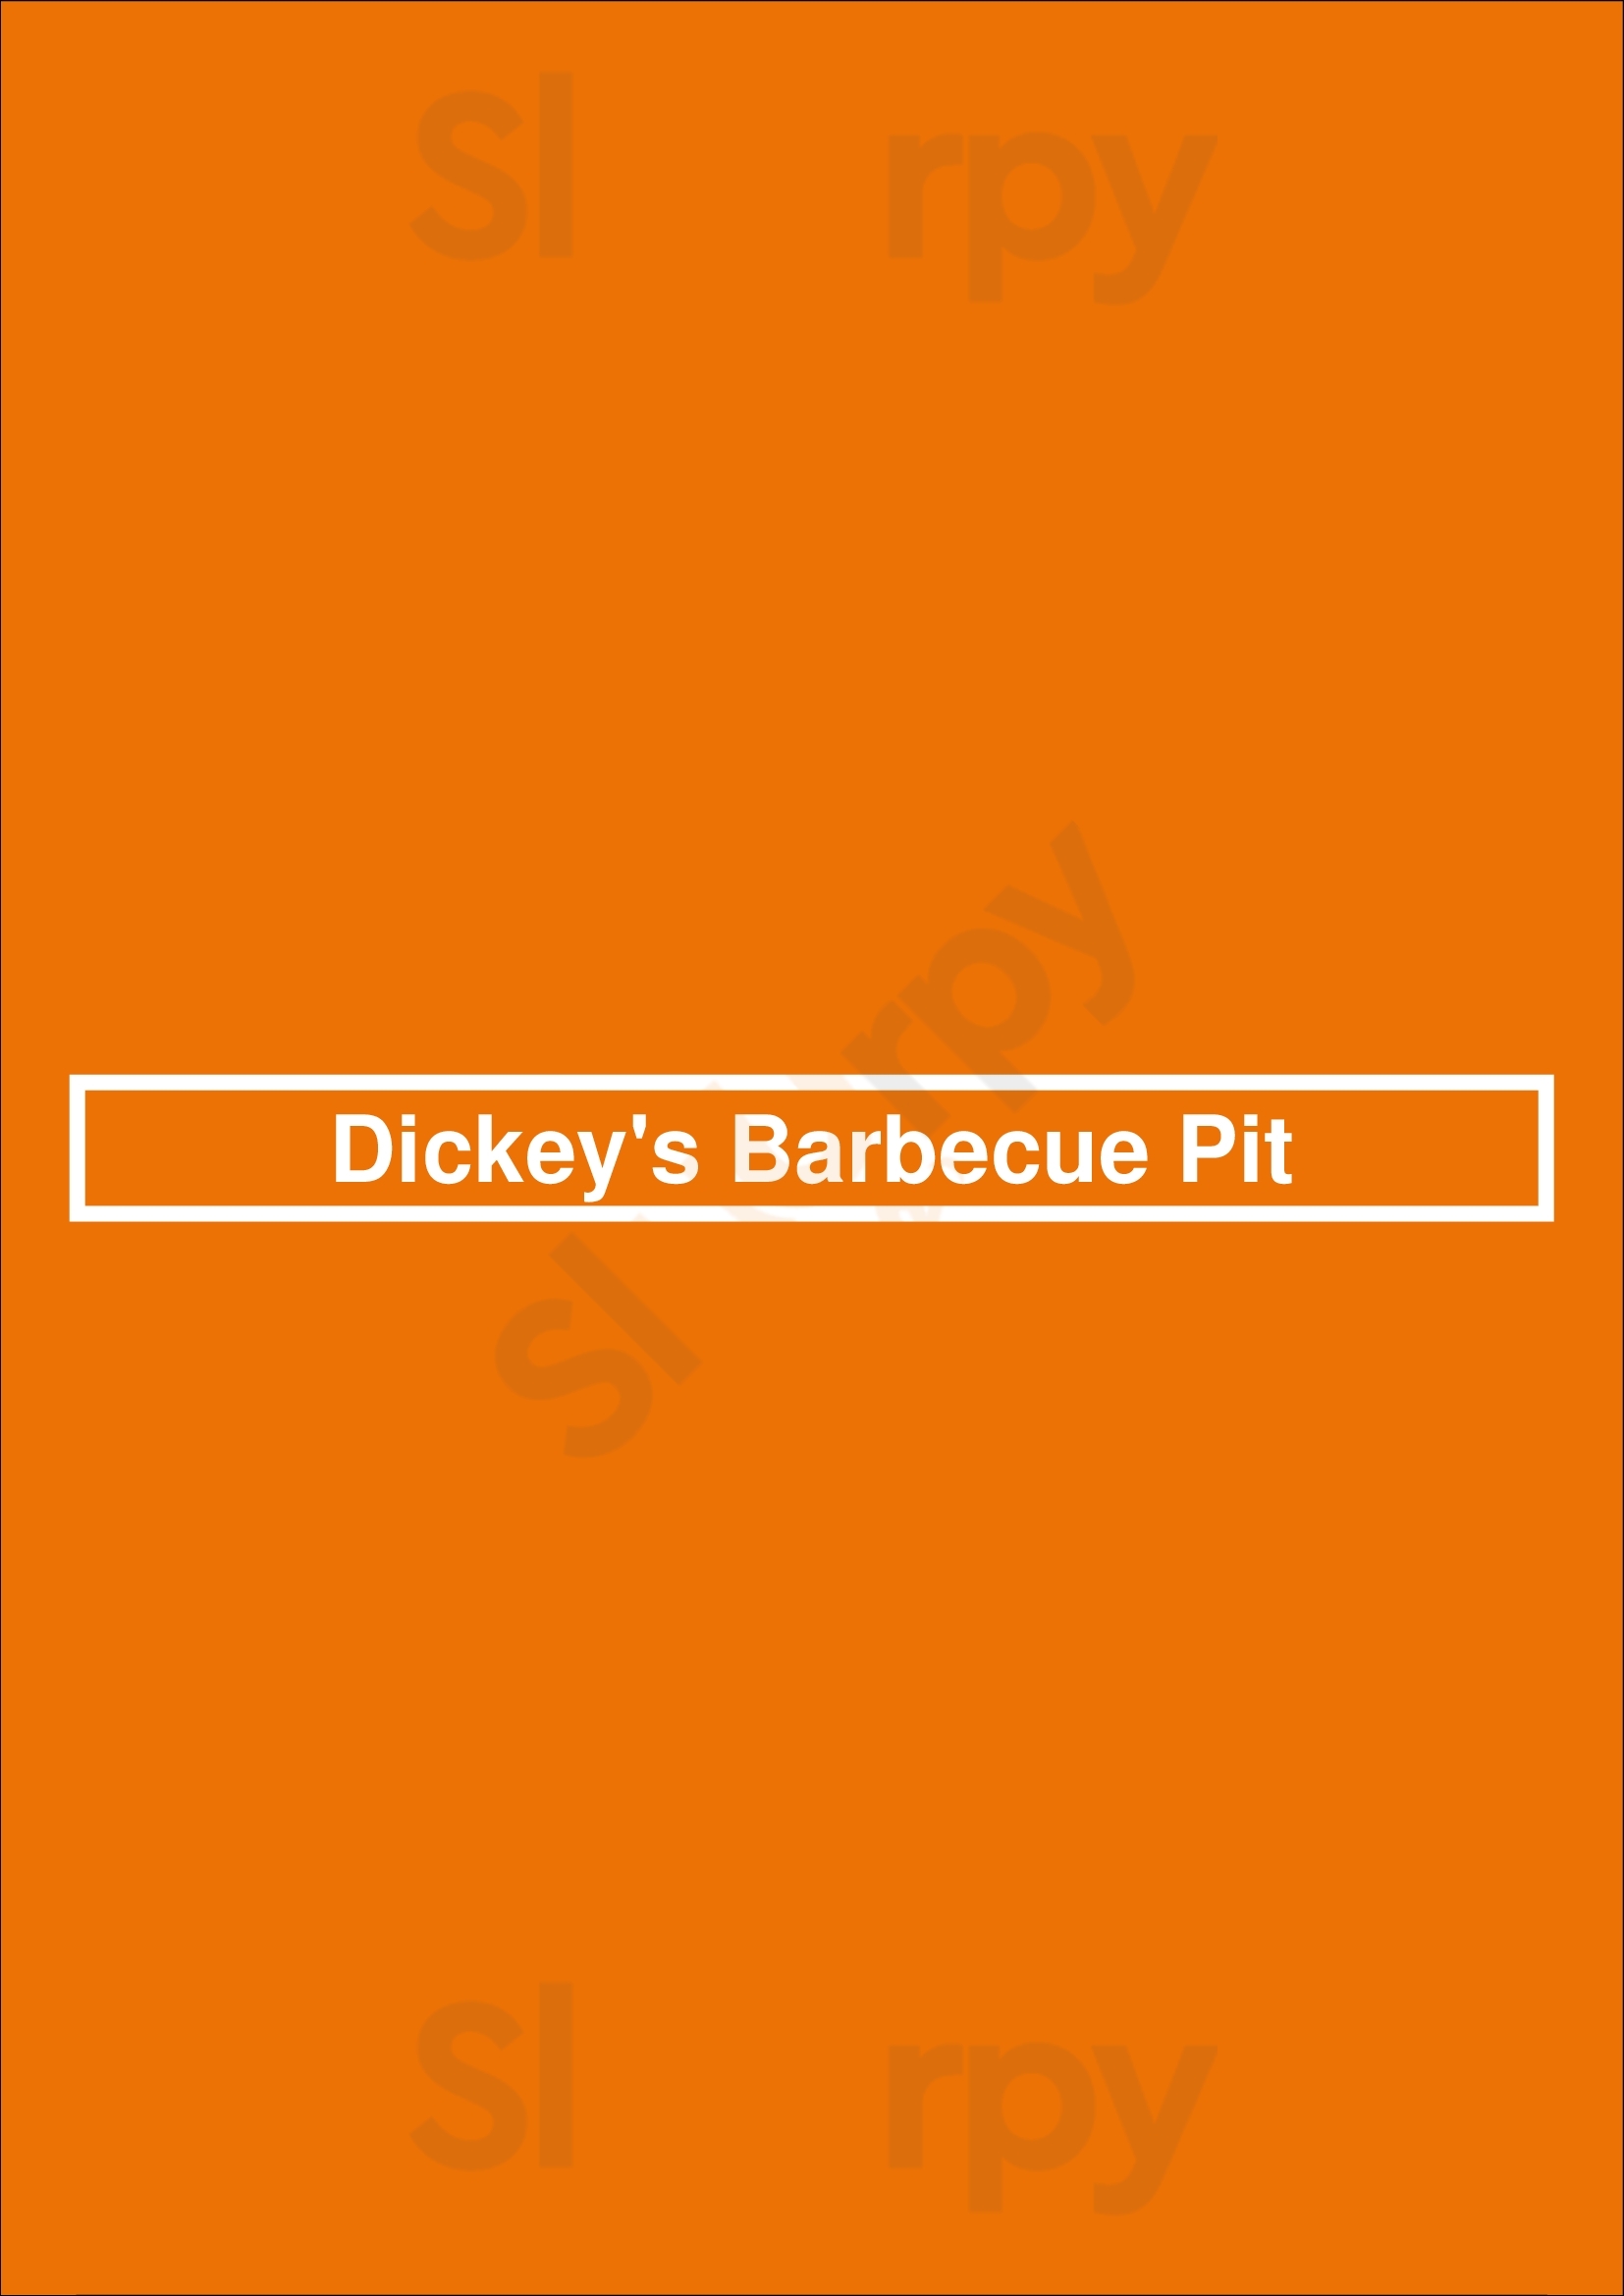 Dickey's Barbecue Pit Lancaster Menu - 1